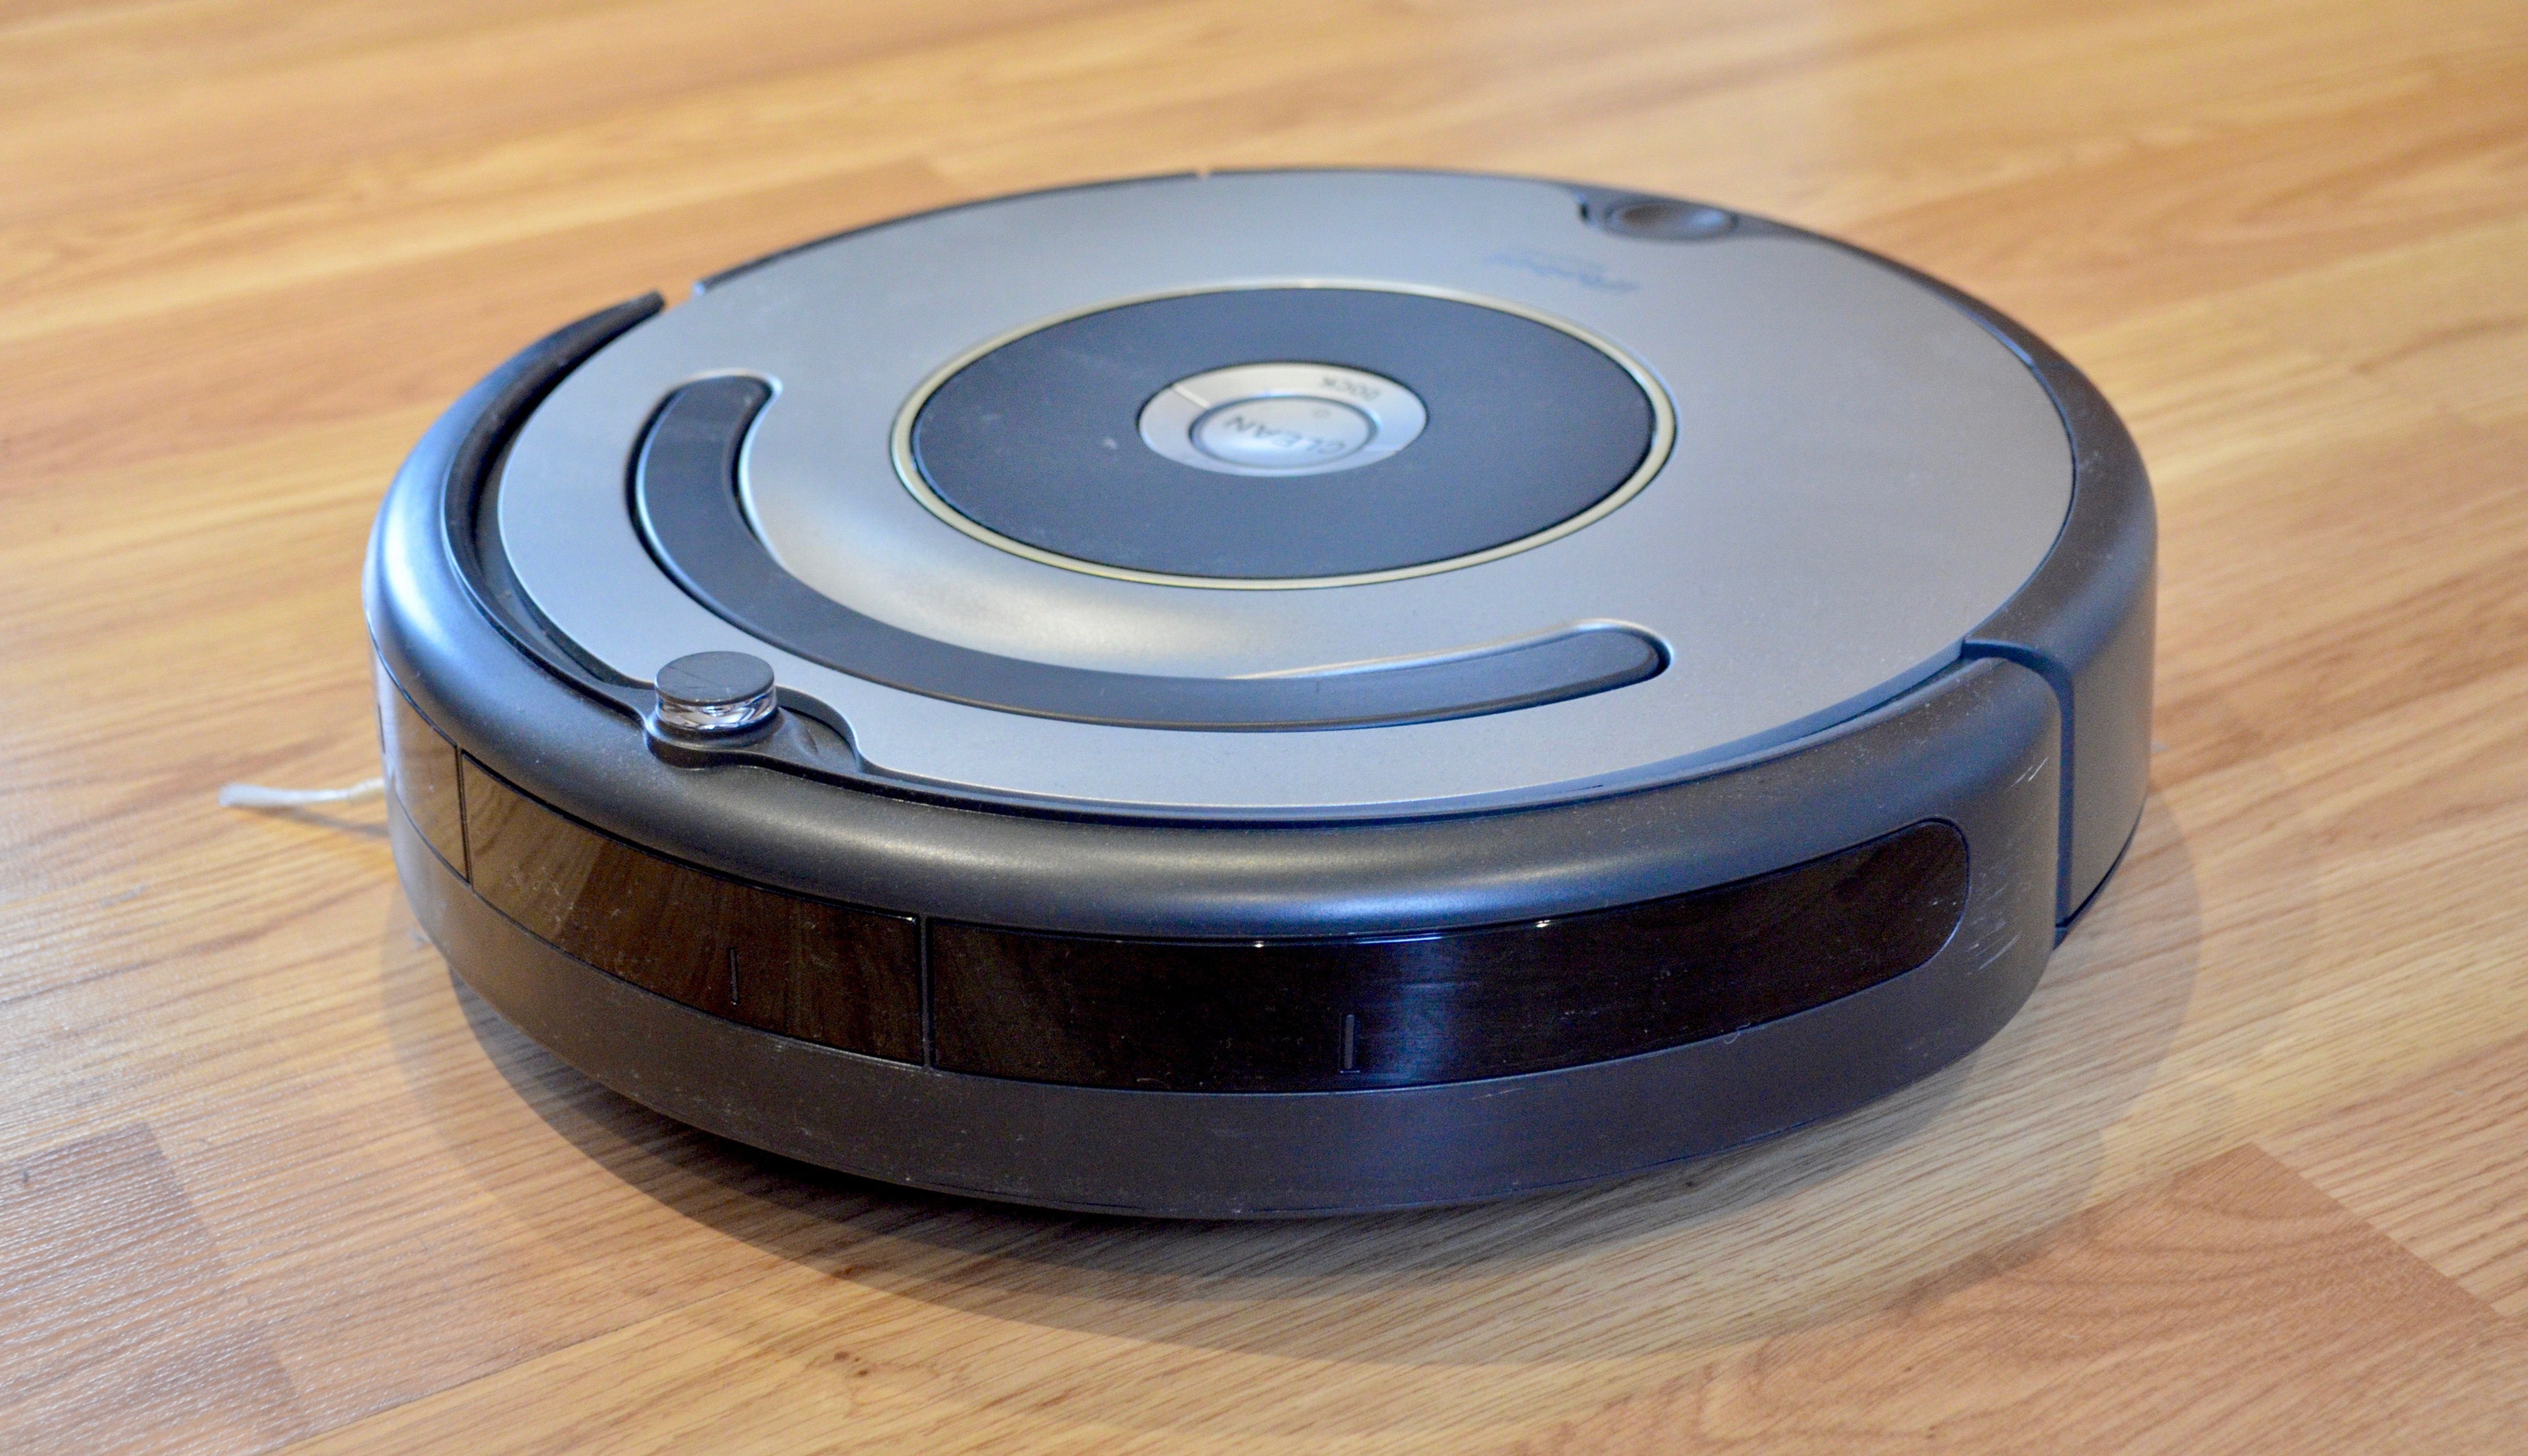 Roomba 616 review: Robotic vacuuming on the cheap - Gearbrain